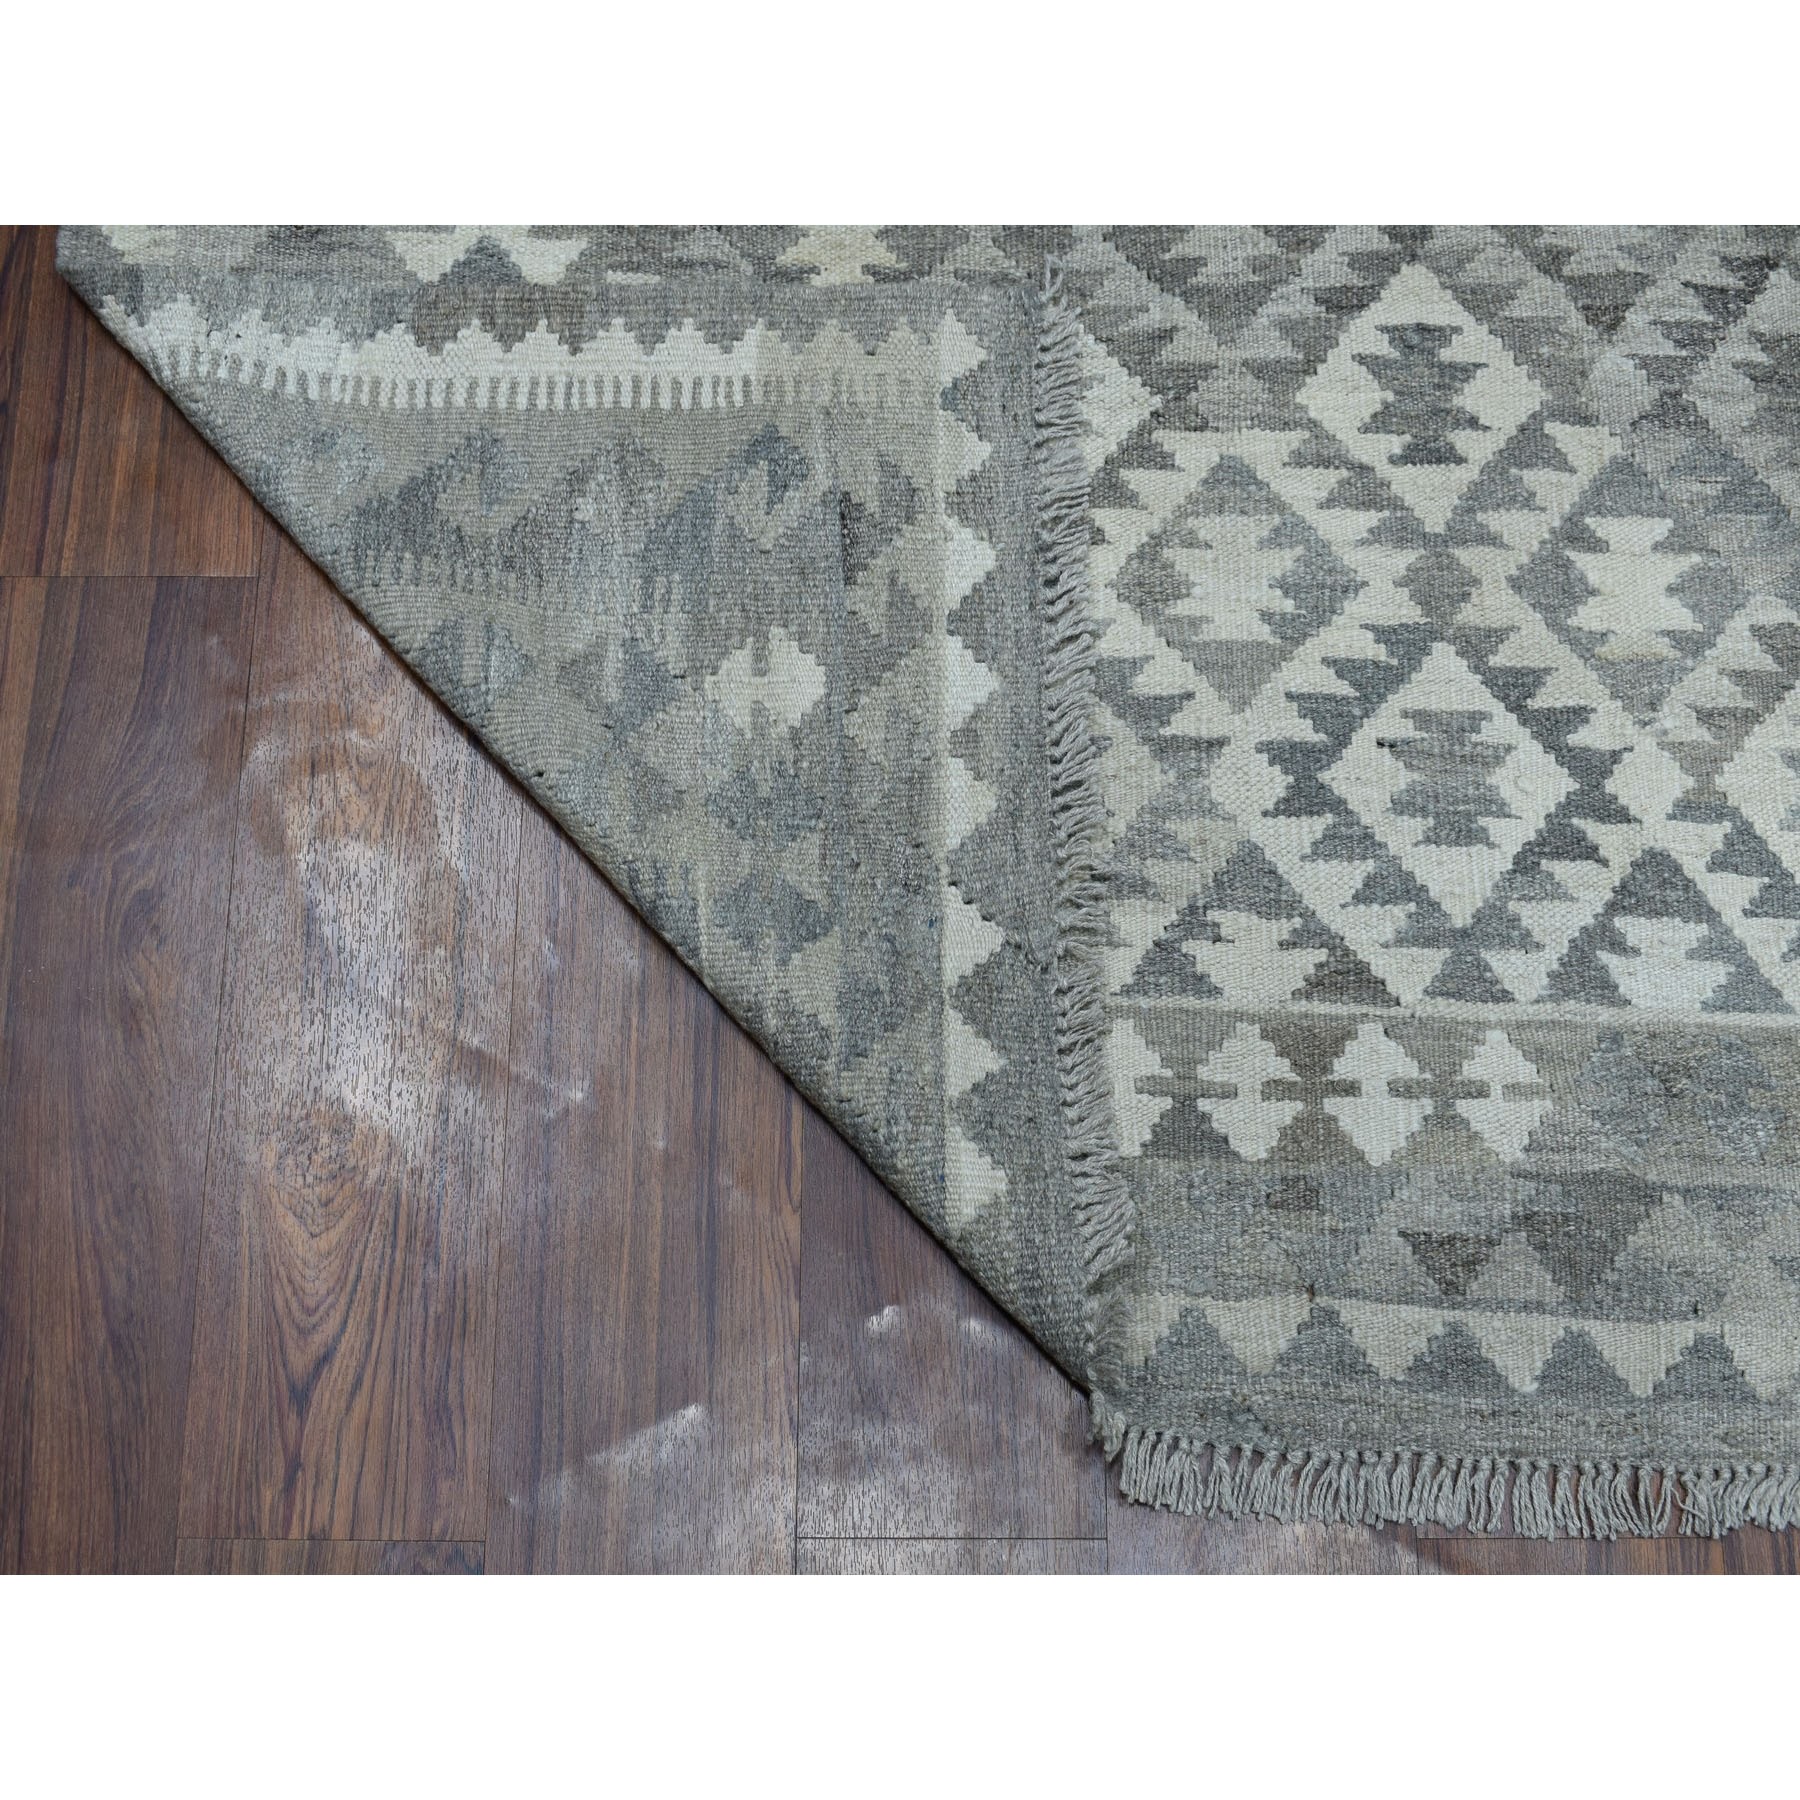 5-8 x8- Undyed Natural Wool Afghan Kilim Reversible Hand Woven Oriental Rug 